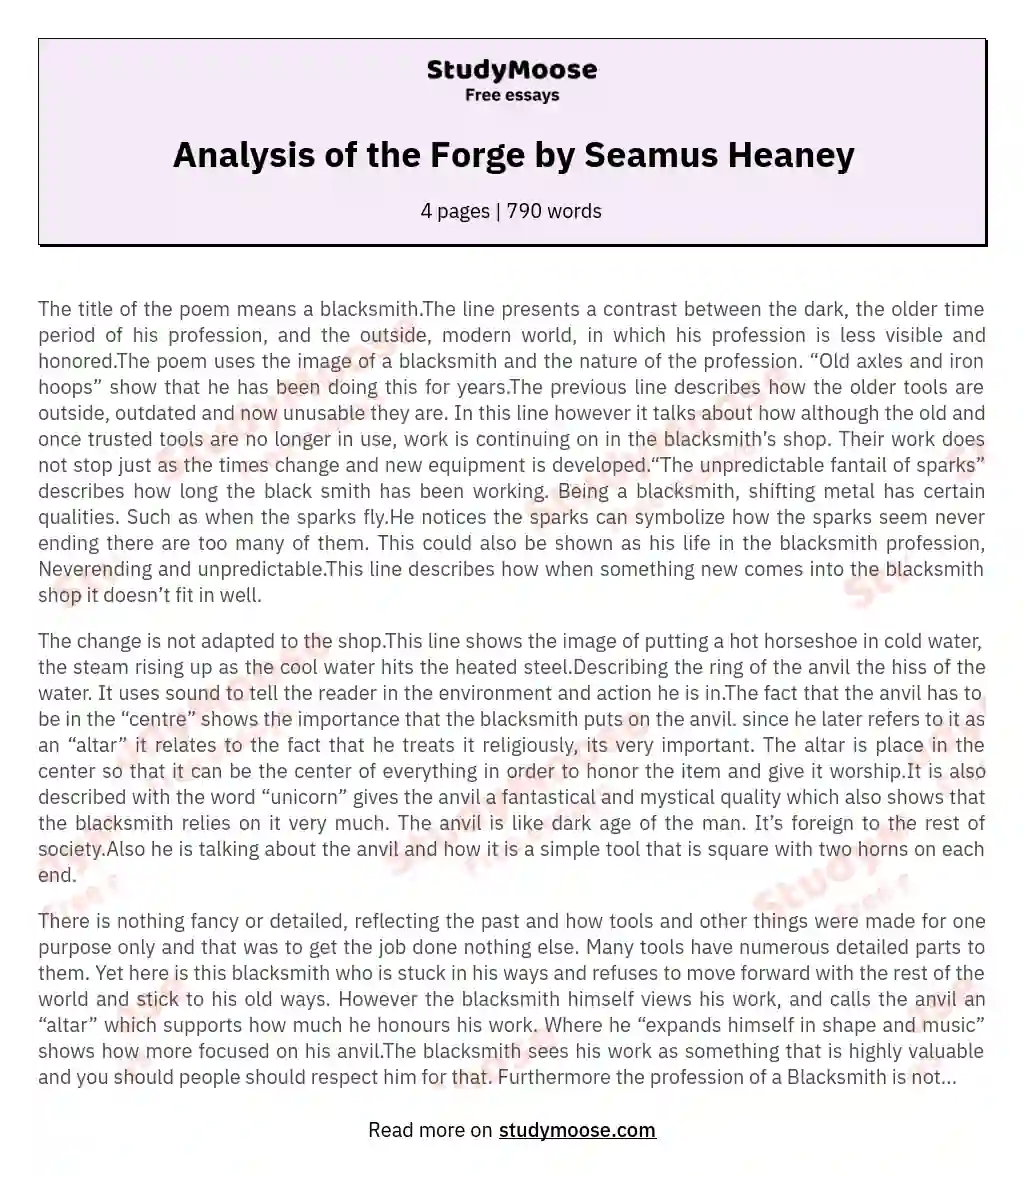 Analysis of the Forge by Seamus Heaney essay